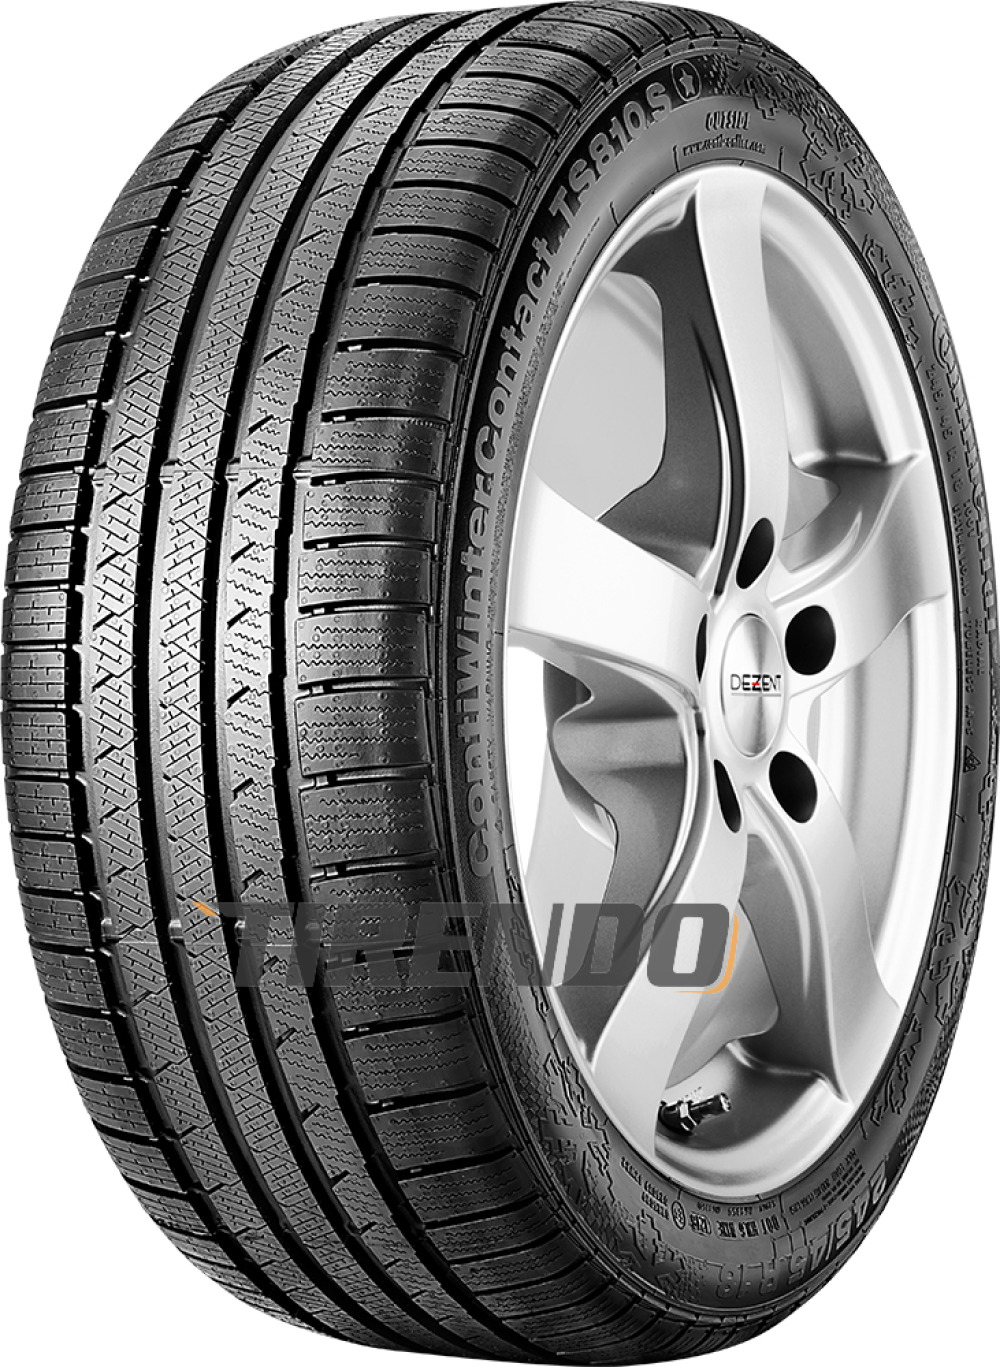 Image of Continental ContiWinterContact TS 810 S ( 235/50 R17 100V XL, N2 )